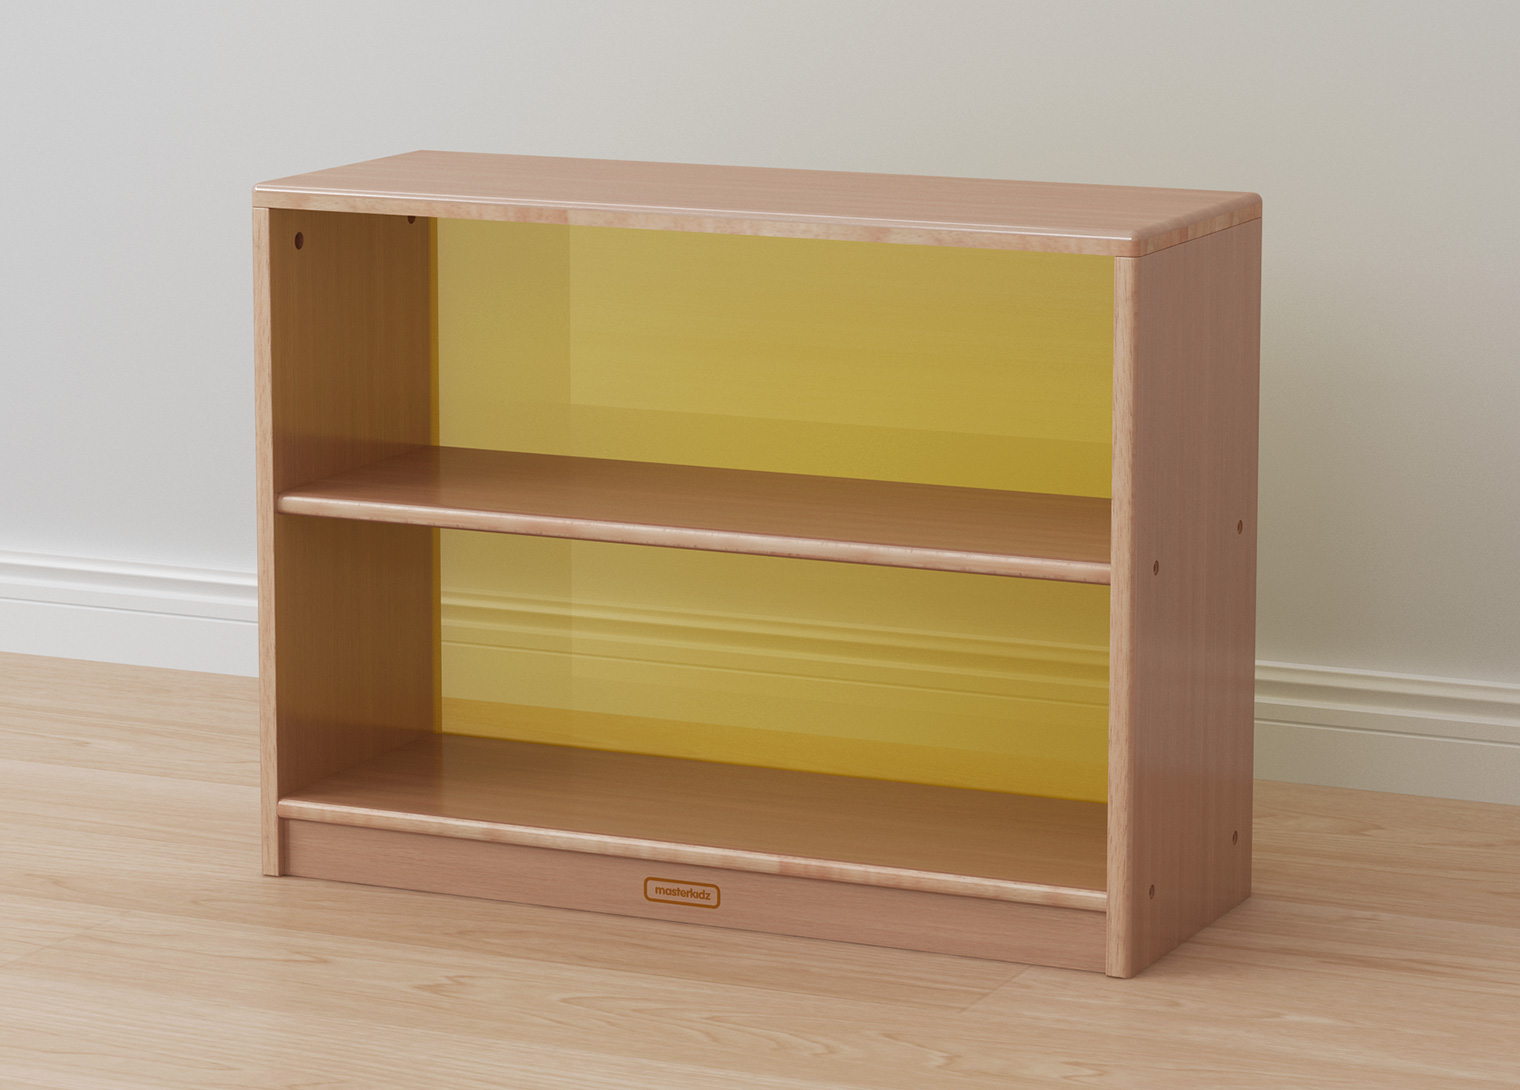 Forest School - 609H x 810L Wooden  Shelving Unit - Translucent Yellow Back